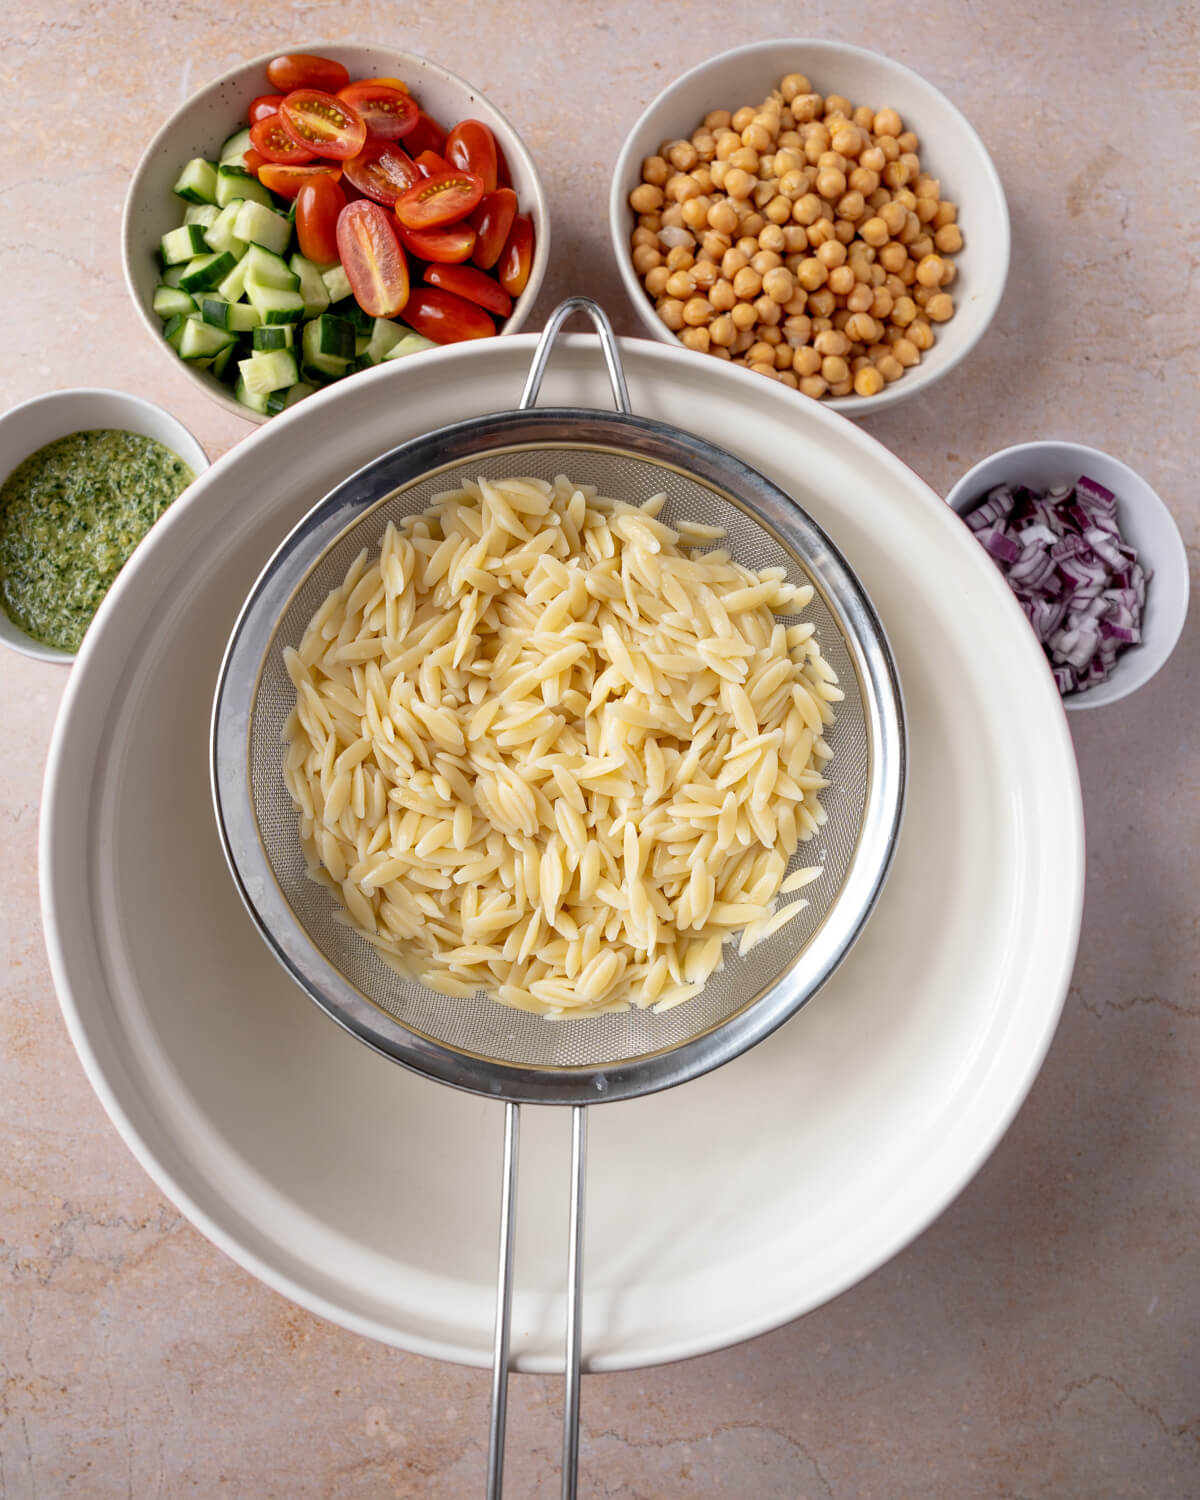 The ingredients for orzo salad around a white bowl. The orzo pasta salad ingredients include pesto, cucumber, tomatoes, chickpeas, and diced red onion..